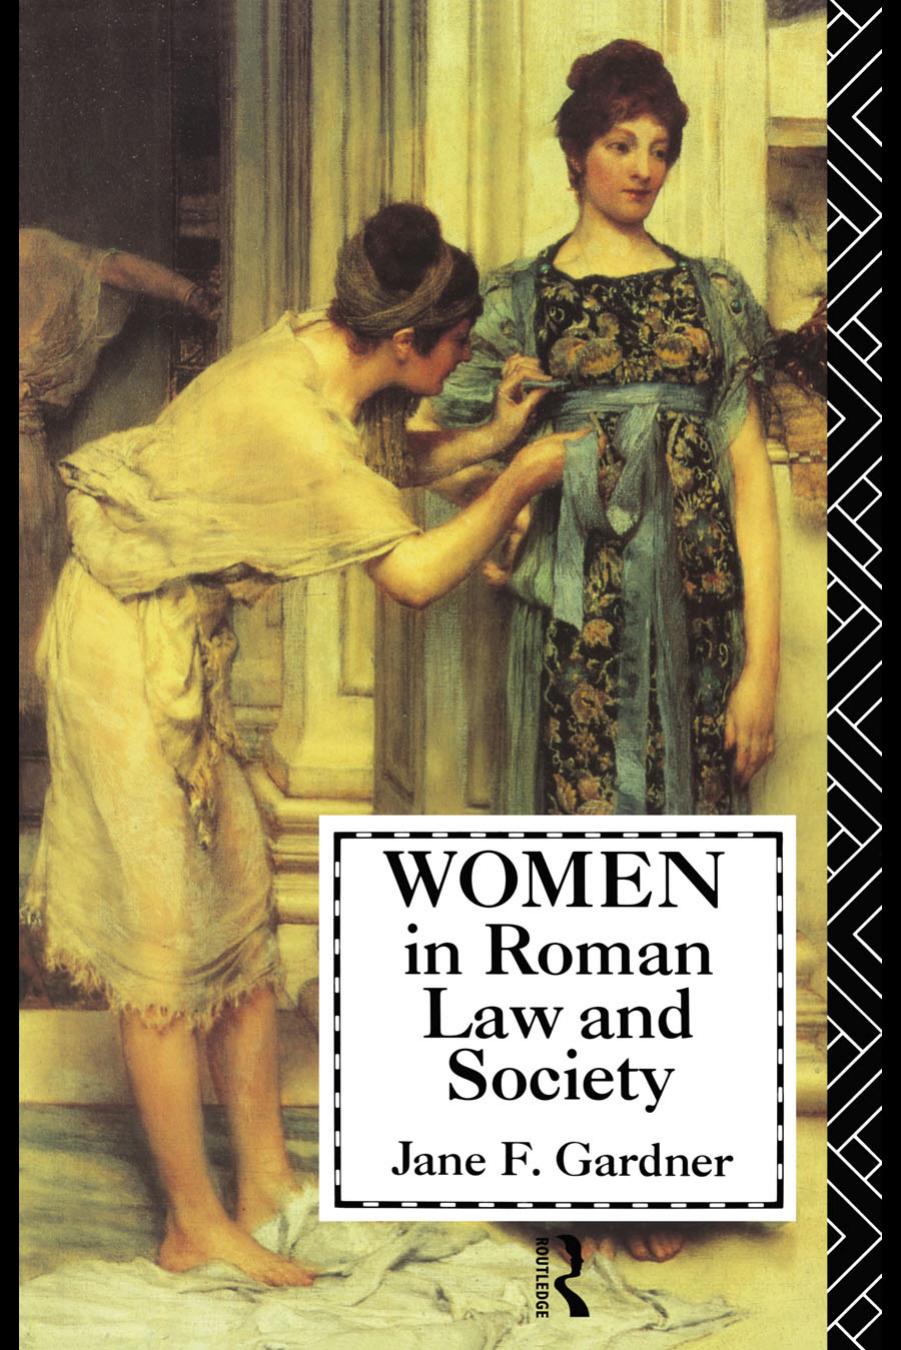 Women in Roman Law and Society by Jane F.Gardner